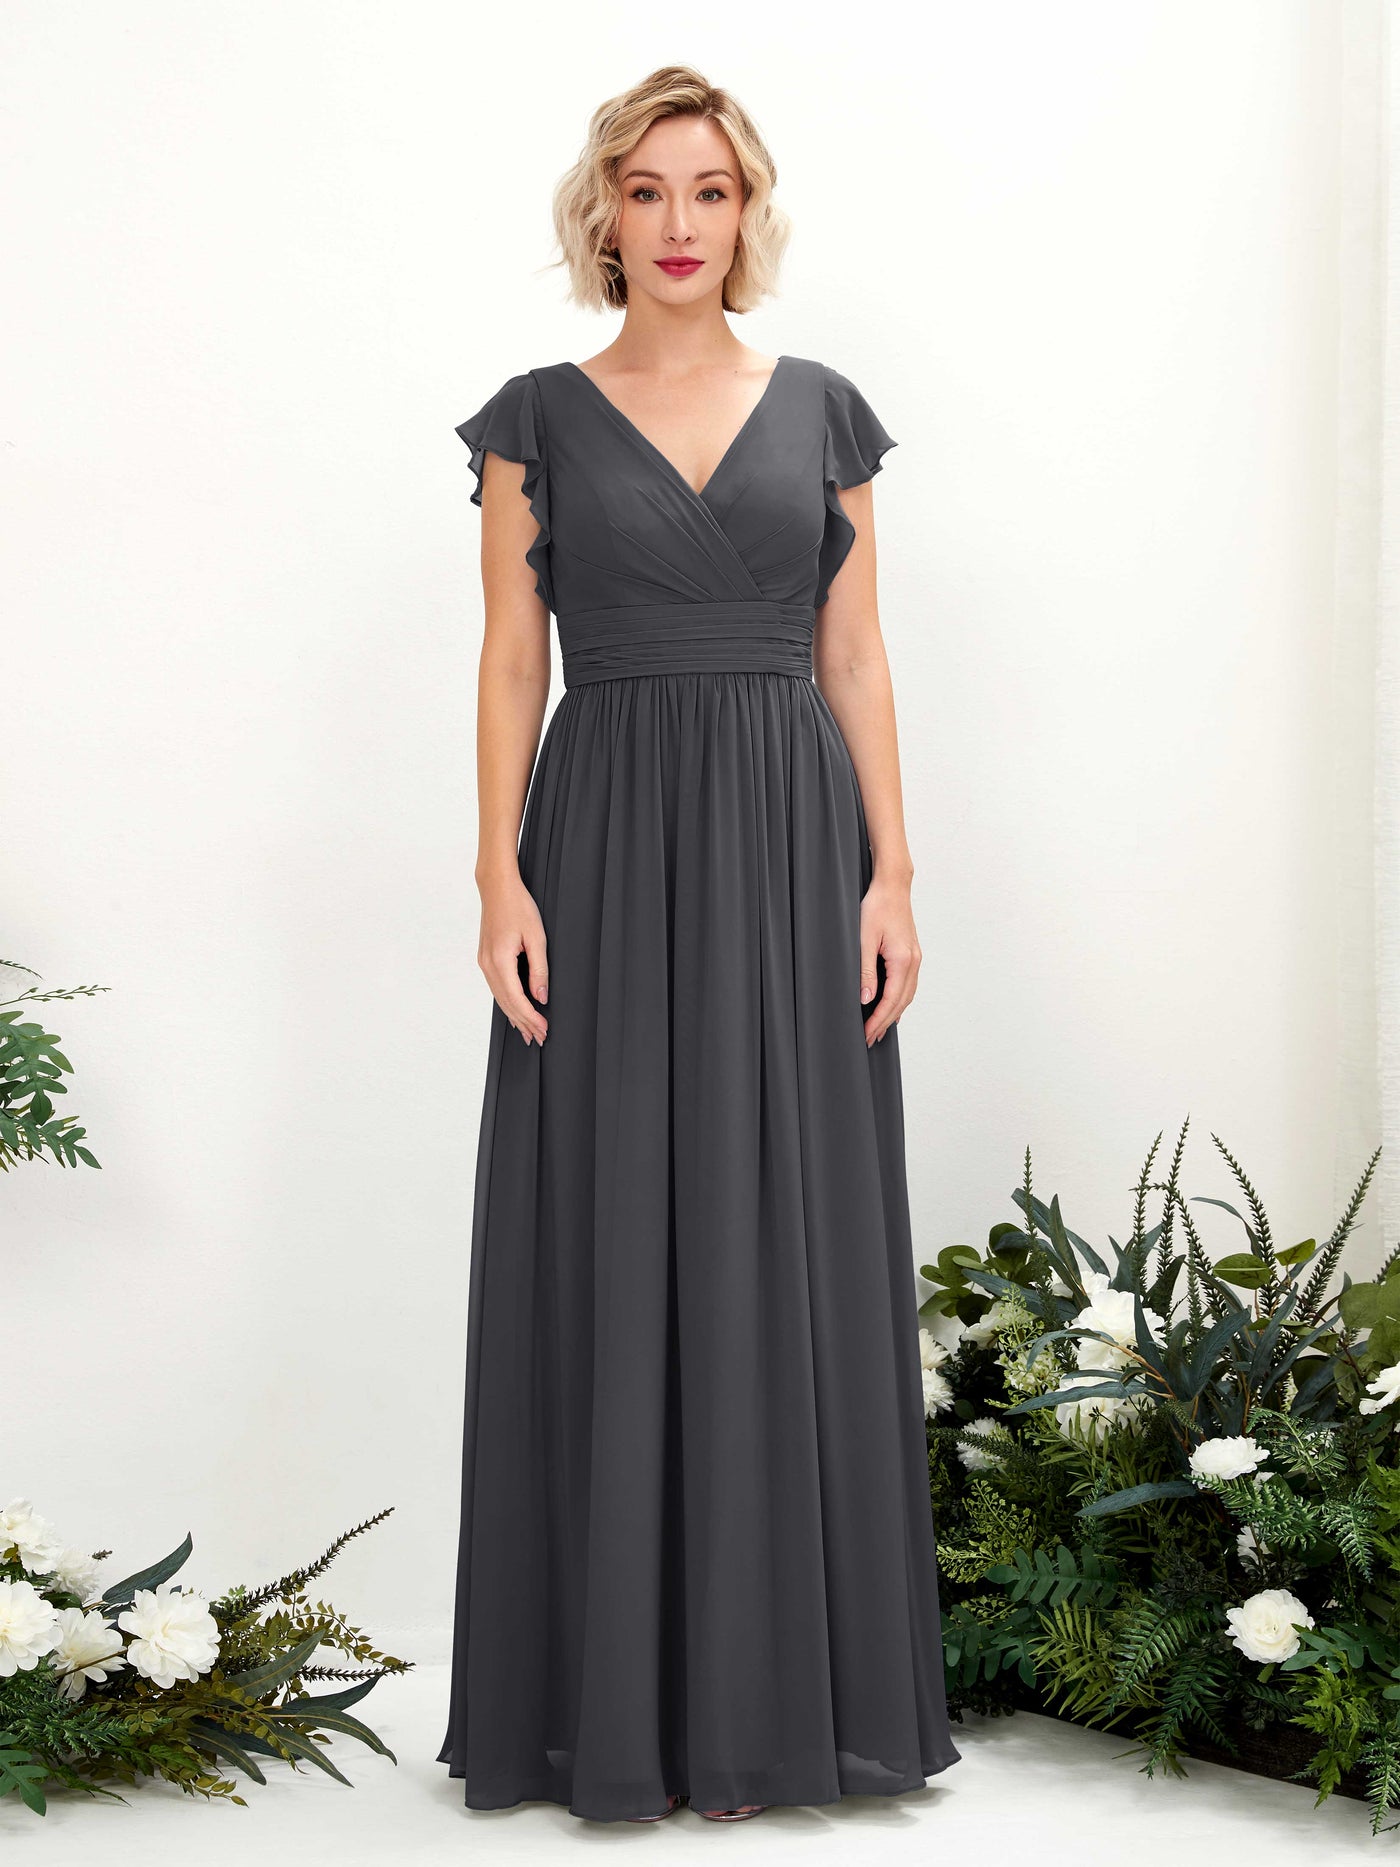 Pewter Bridesmaid Dresses Bridesmaid Dress A-line Chiffon V-neck Full Length Short Sleeves Wedding Party Dress (81222738)#color_pewter